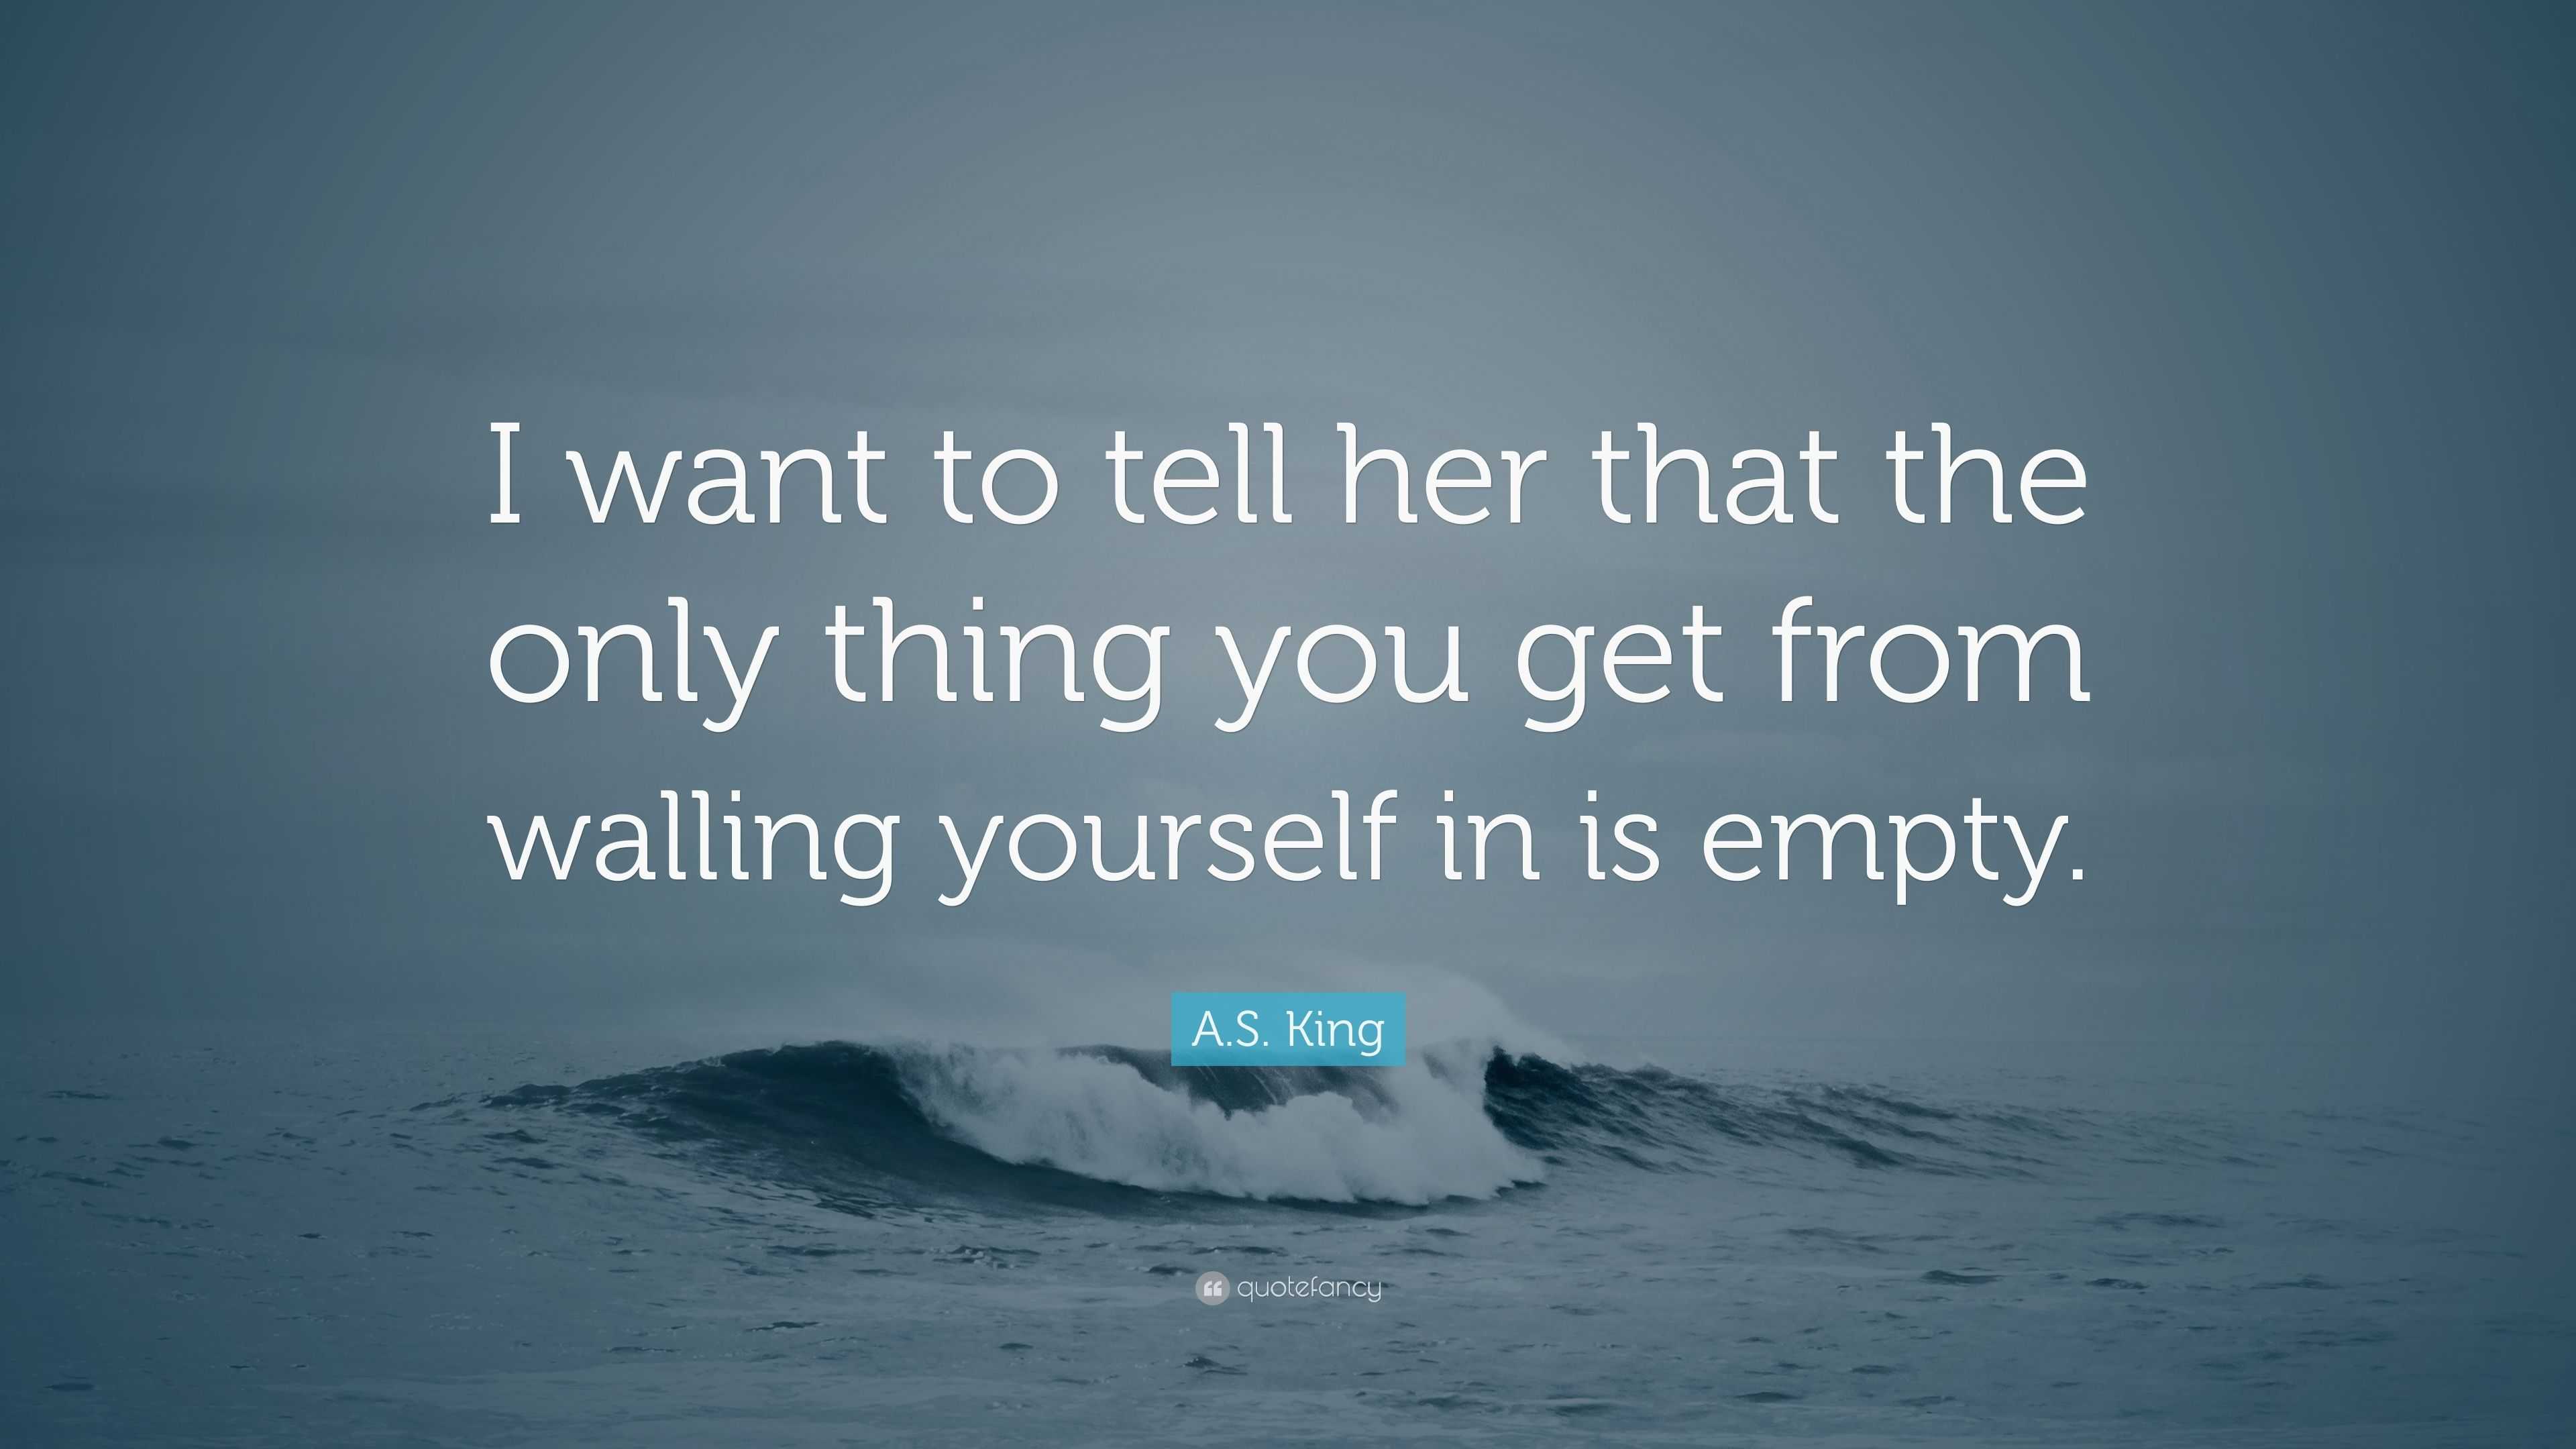 A.S. King Quote: “I want to tell her that the only thing you get from ...